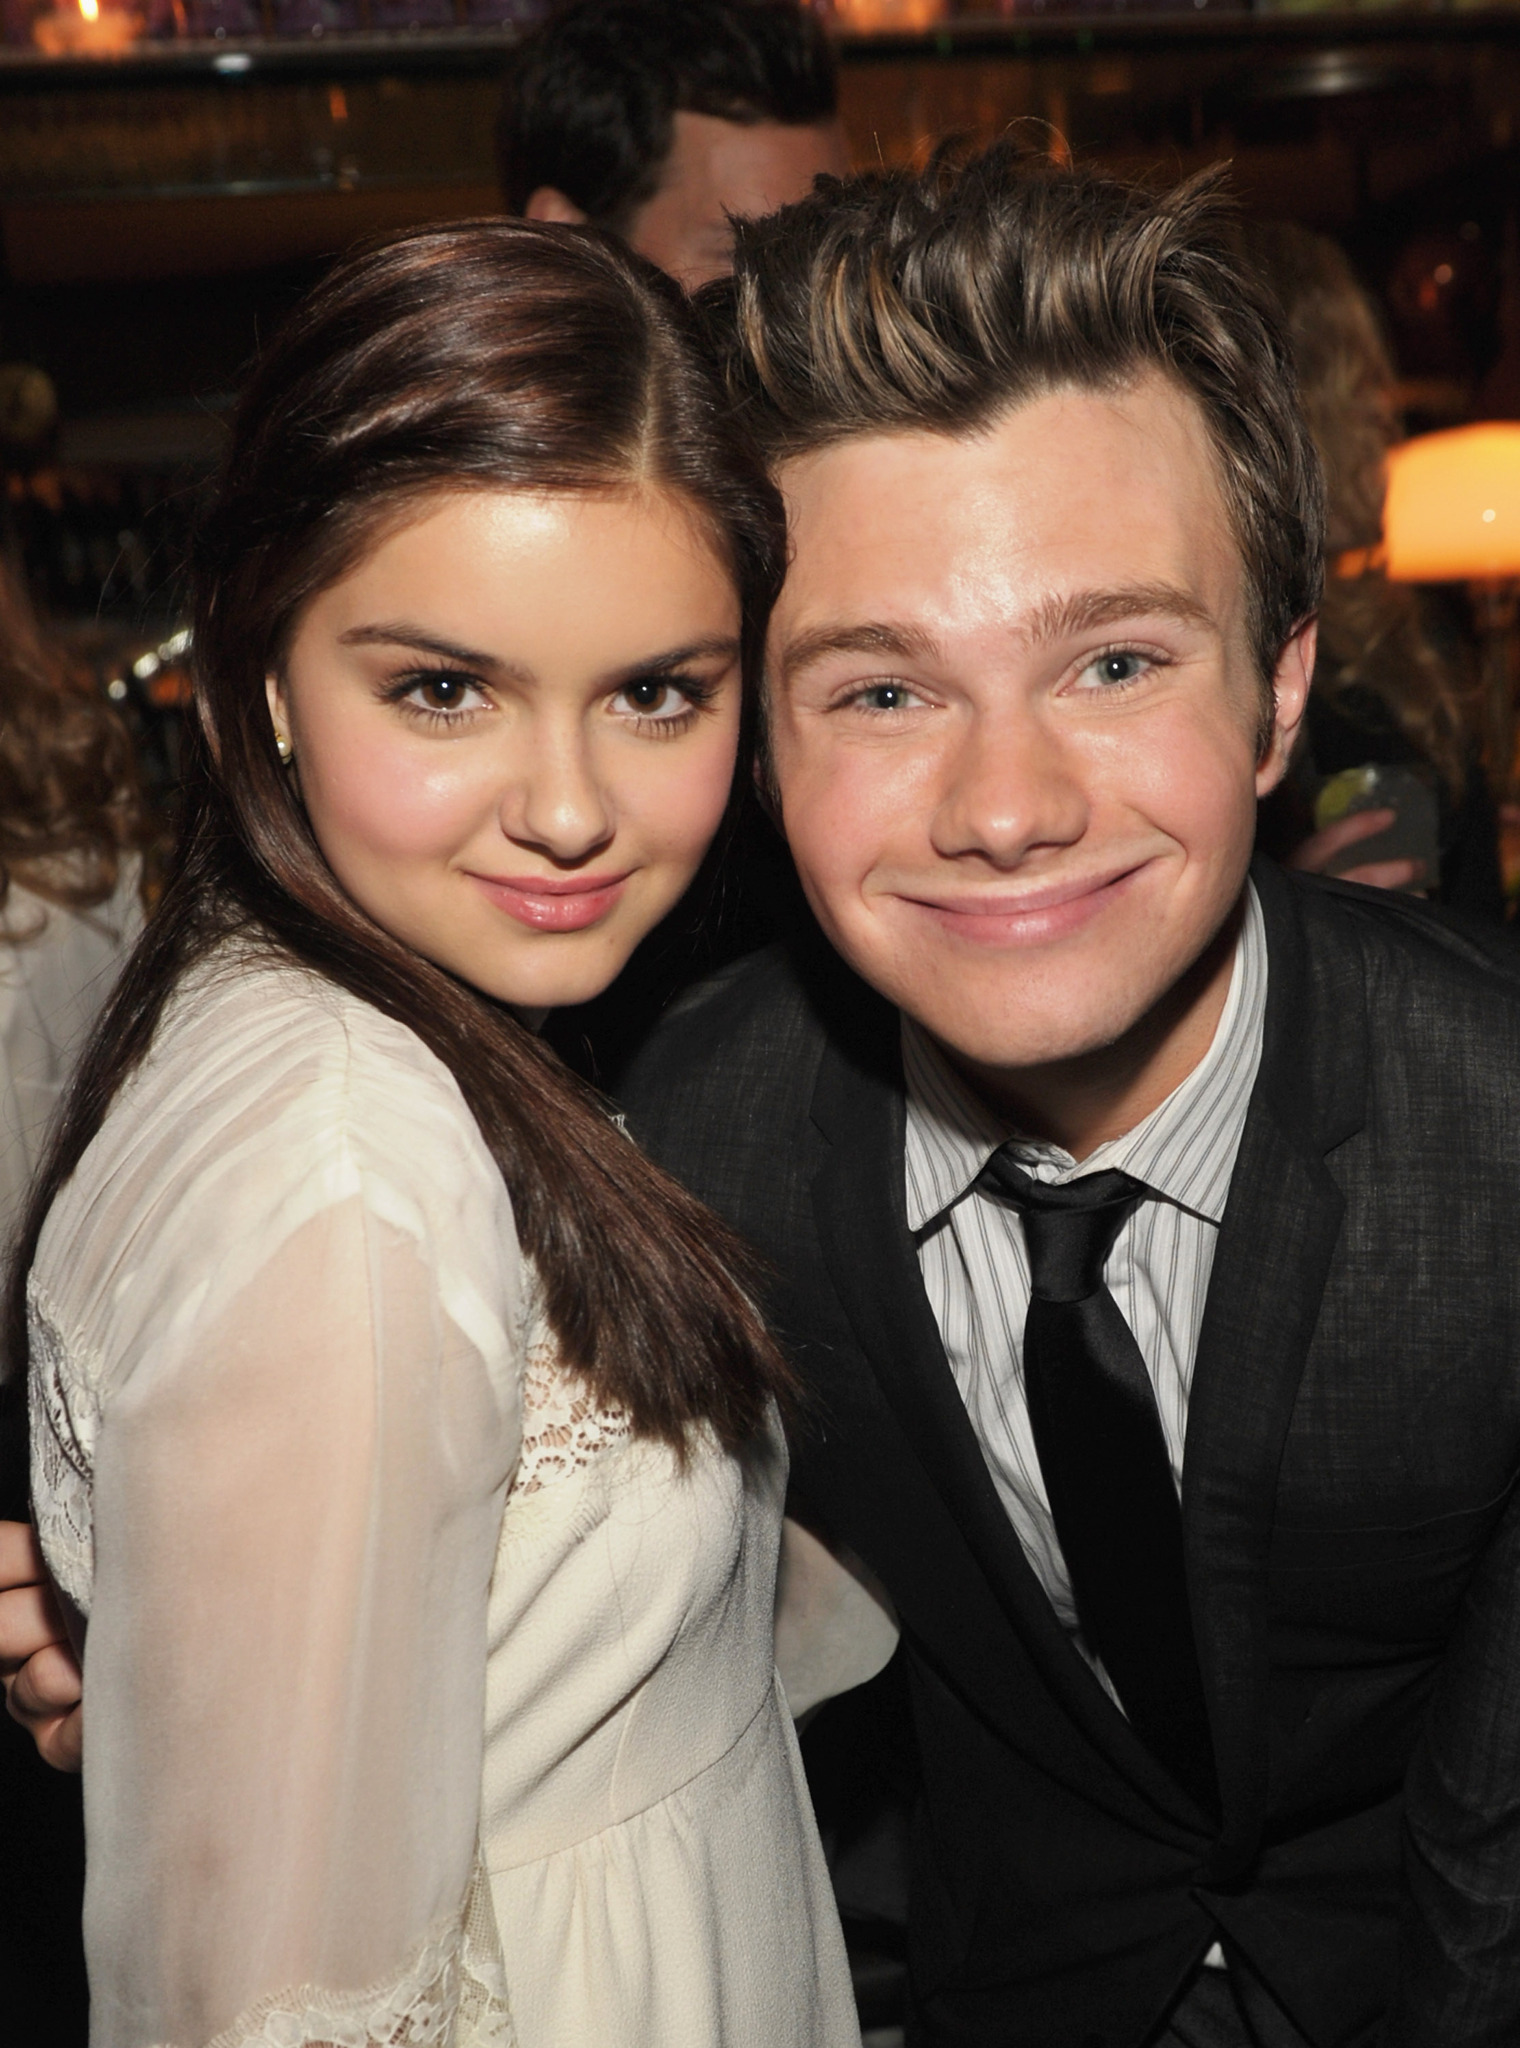 Ariel Winter and Chris Colfer